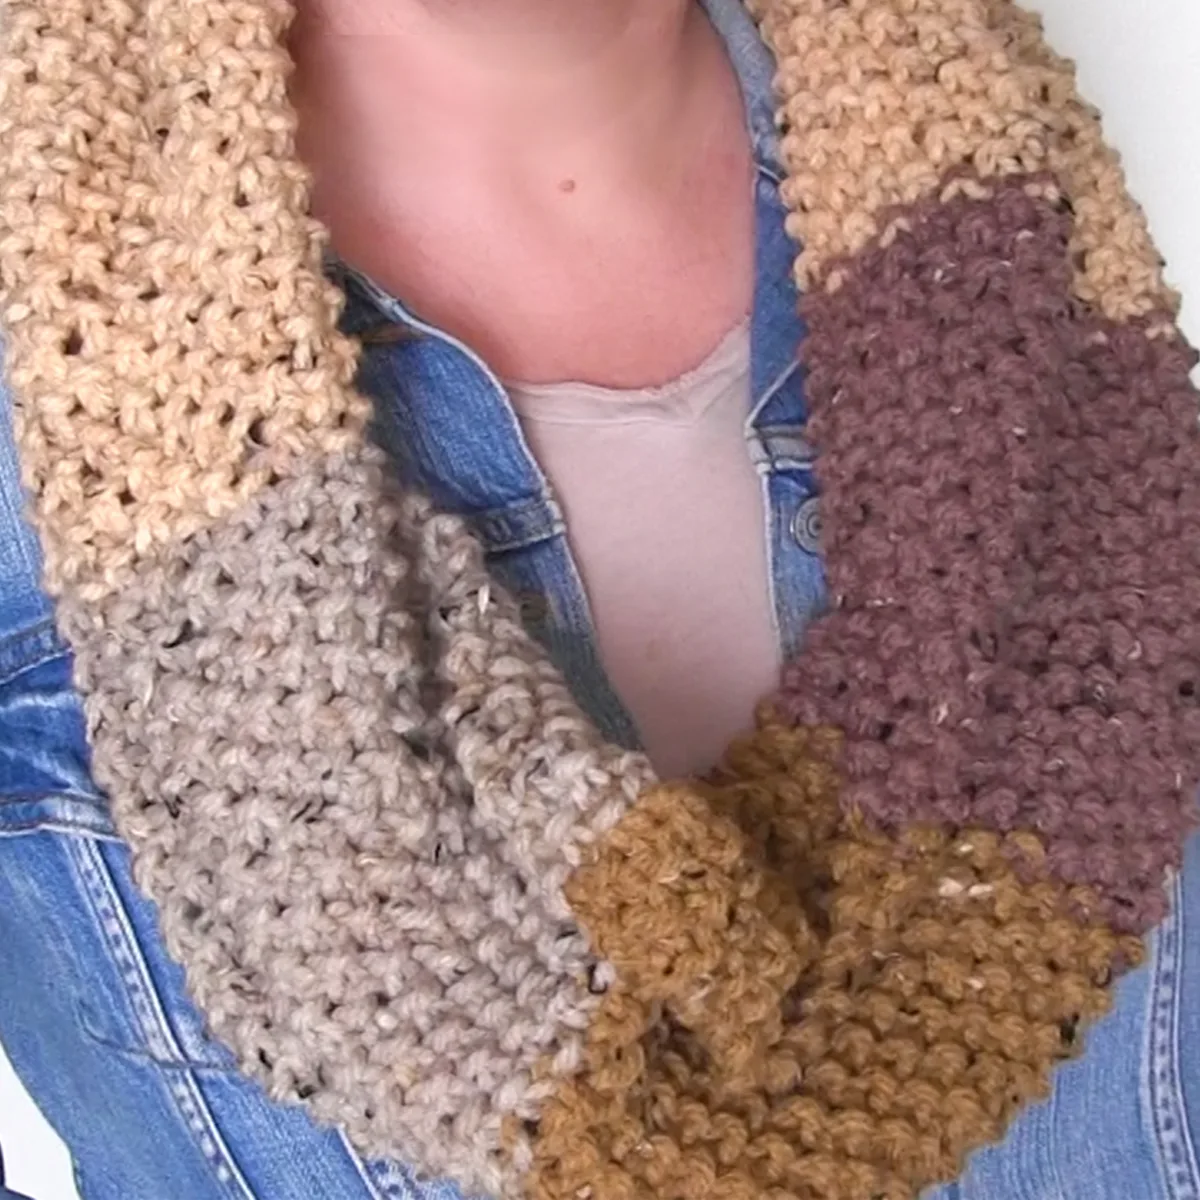 Knitted Seed Stitch Infinity Scarf in different shades of brown yarn colors worn by woman in jean jacket.